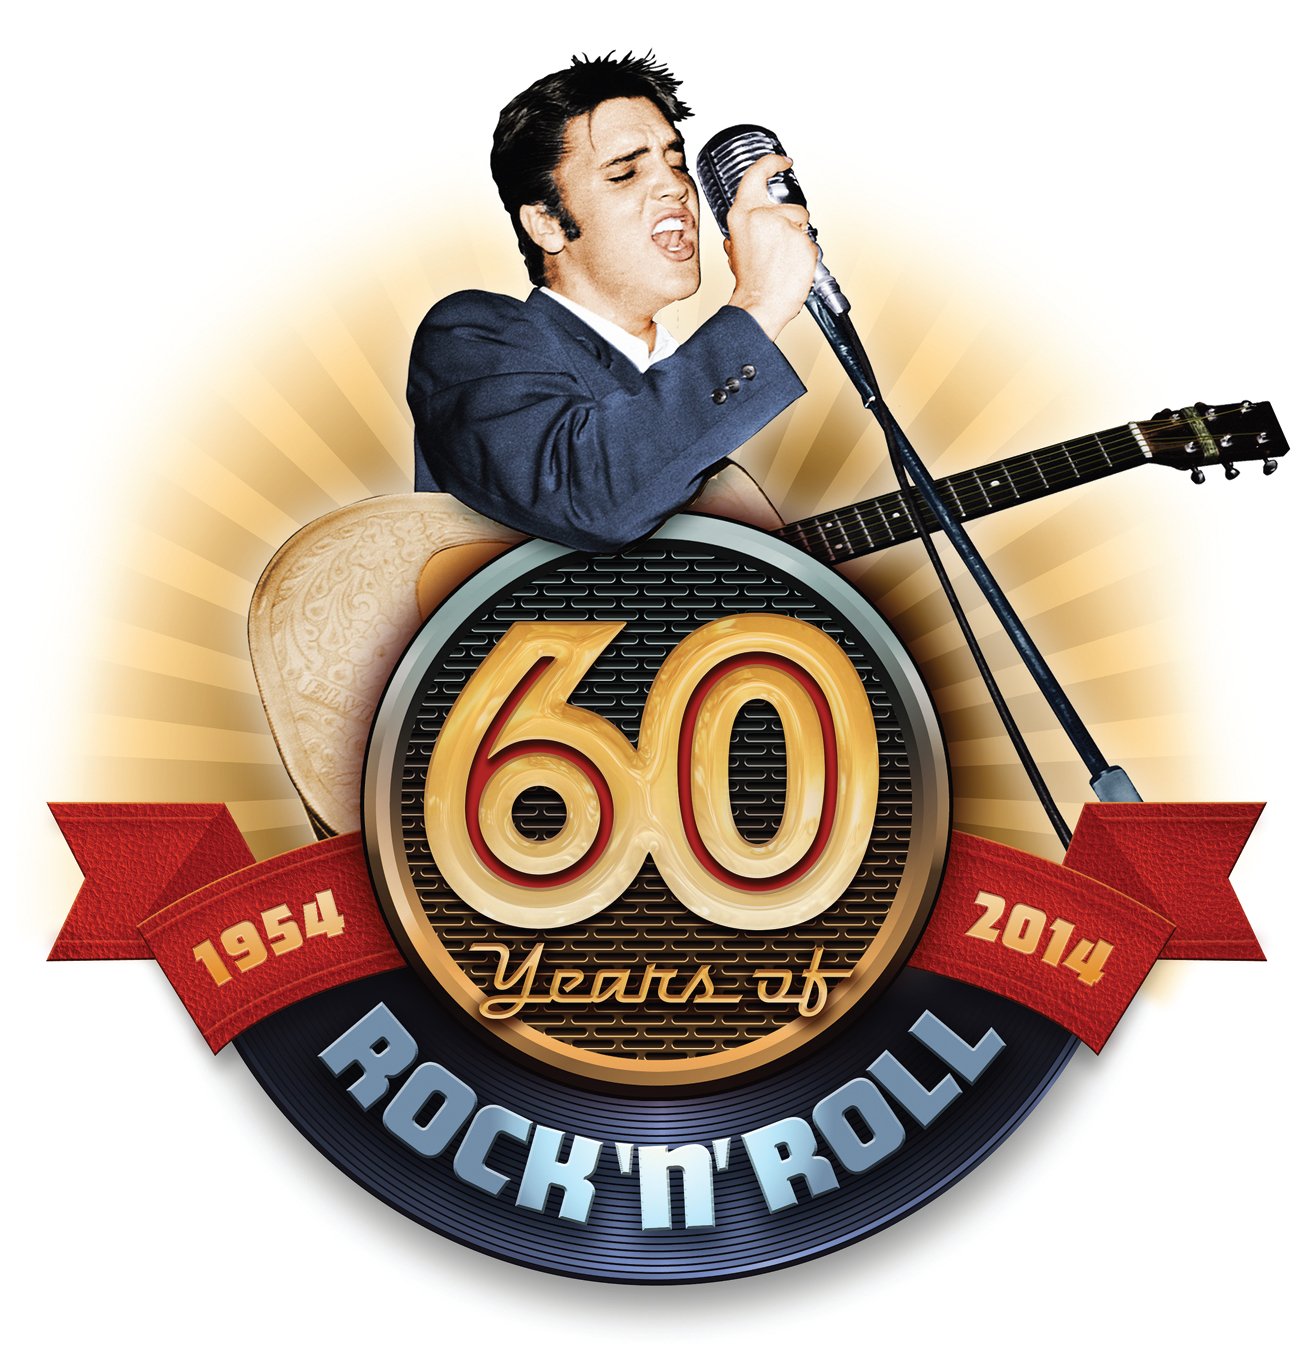 60 years of Rock and Roll Elvis Presley Logo Google image from  http://www.elvis.com/!userfiles/editor/images/60YearsLogo.jpg